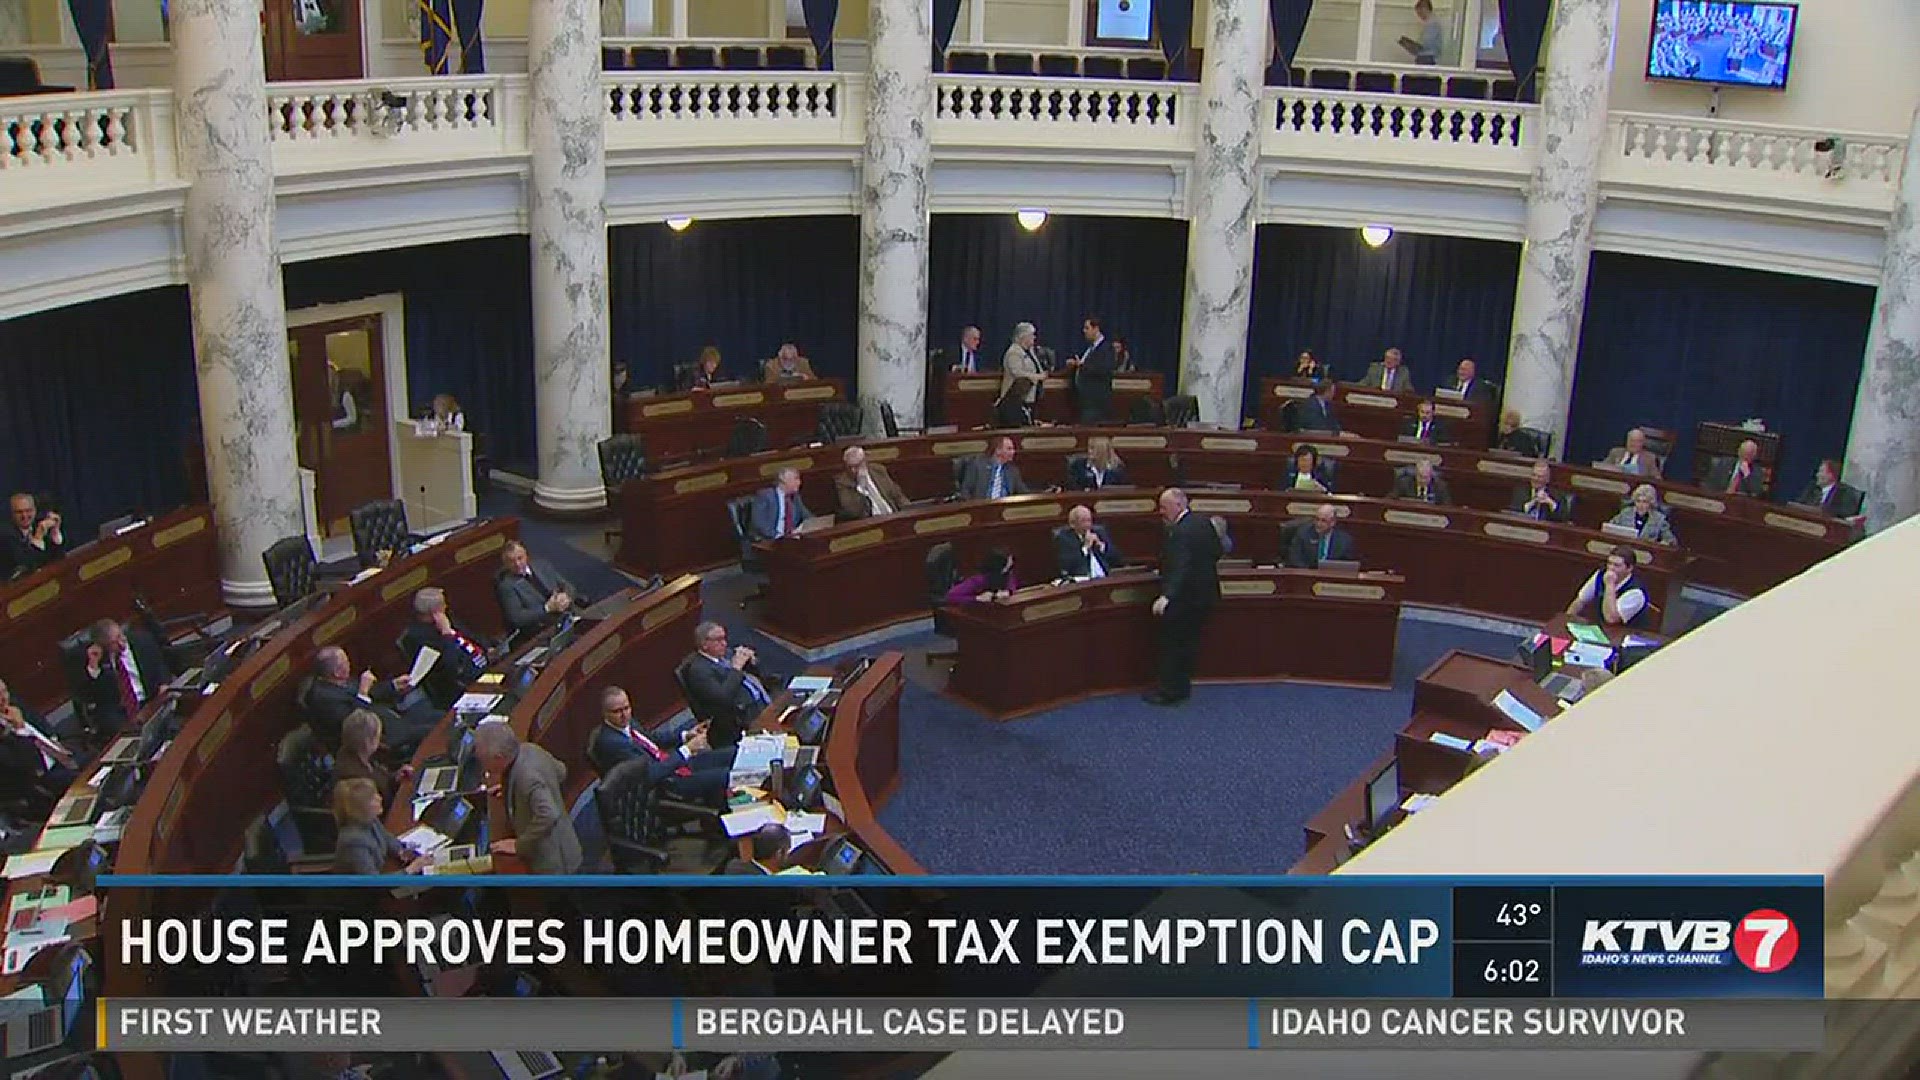 The bill would cap the exemption at $100,000.